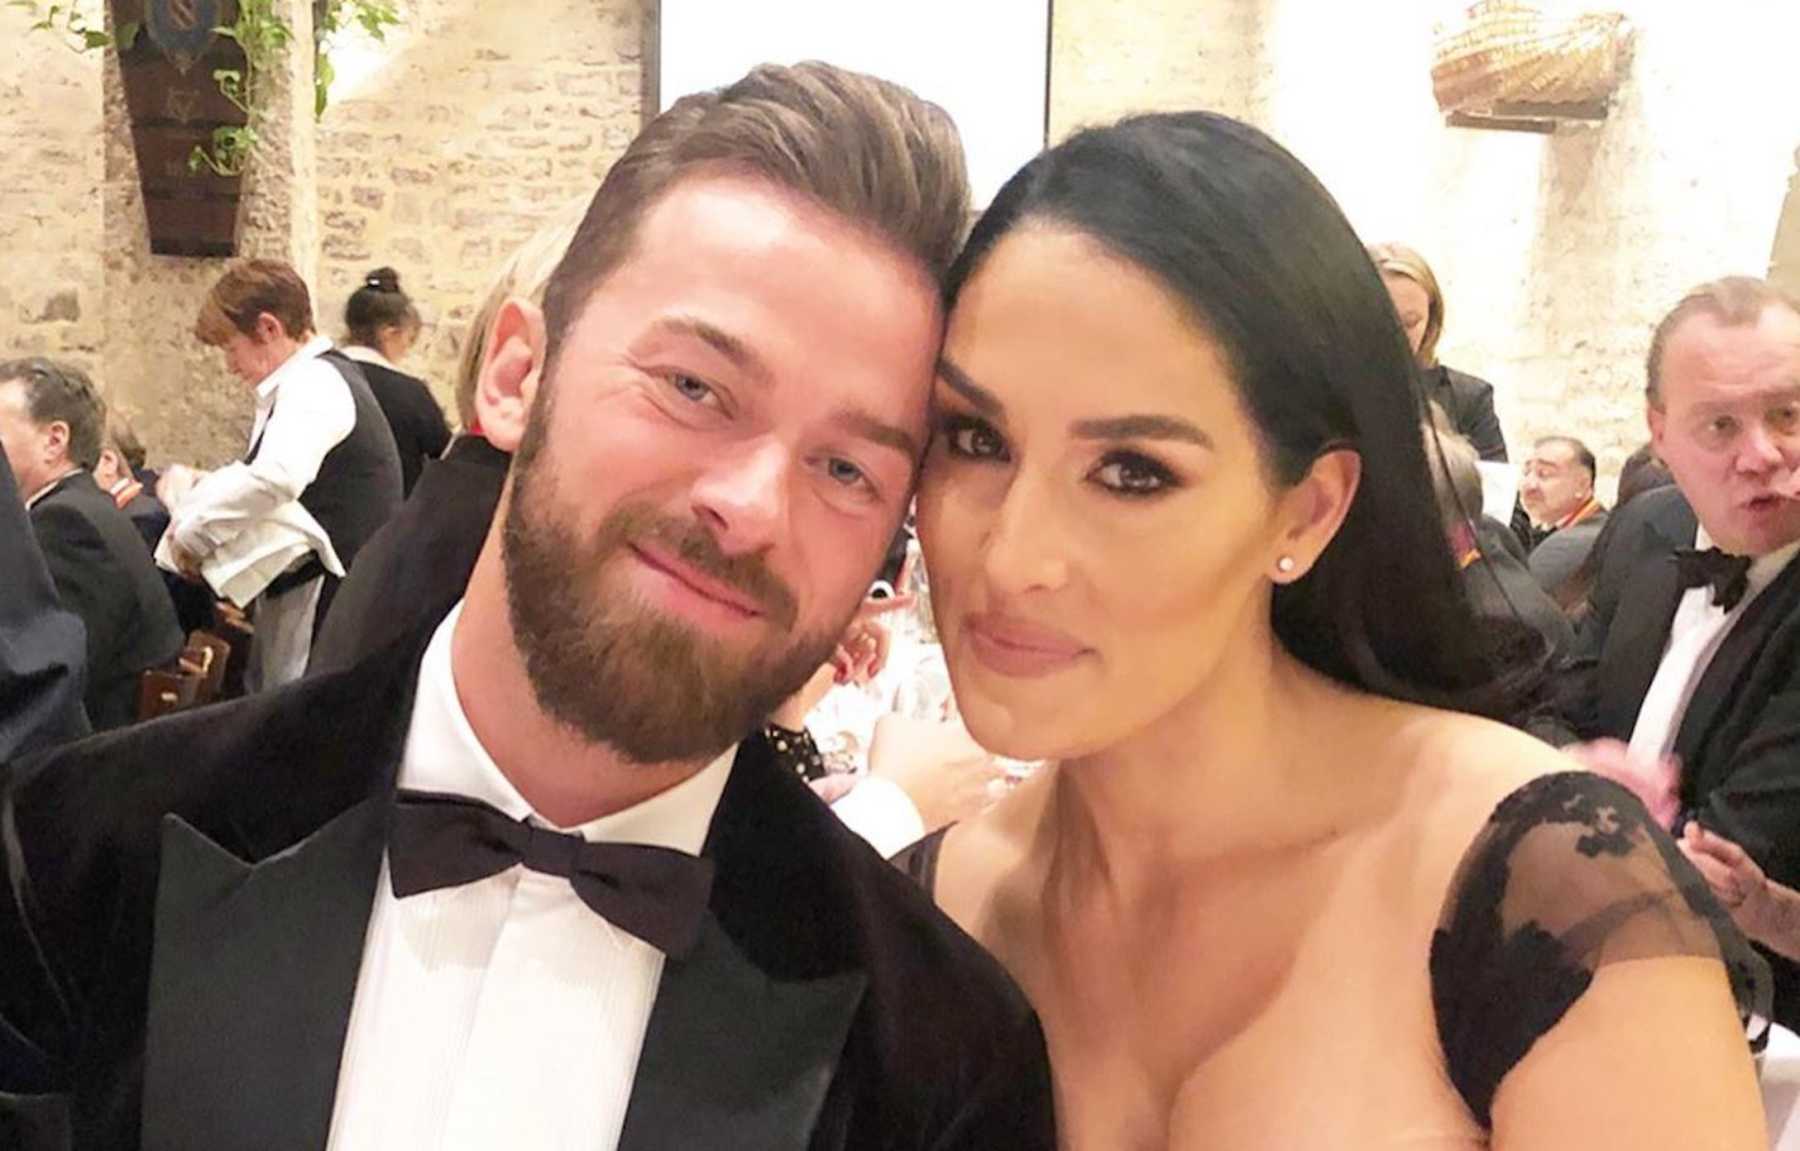 ”nikki-bella-dragged-for-going-on-trips-and-leaving-artem-and-their-baby-at-home-she-claps-back”